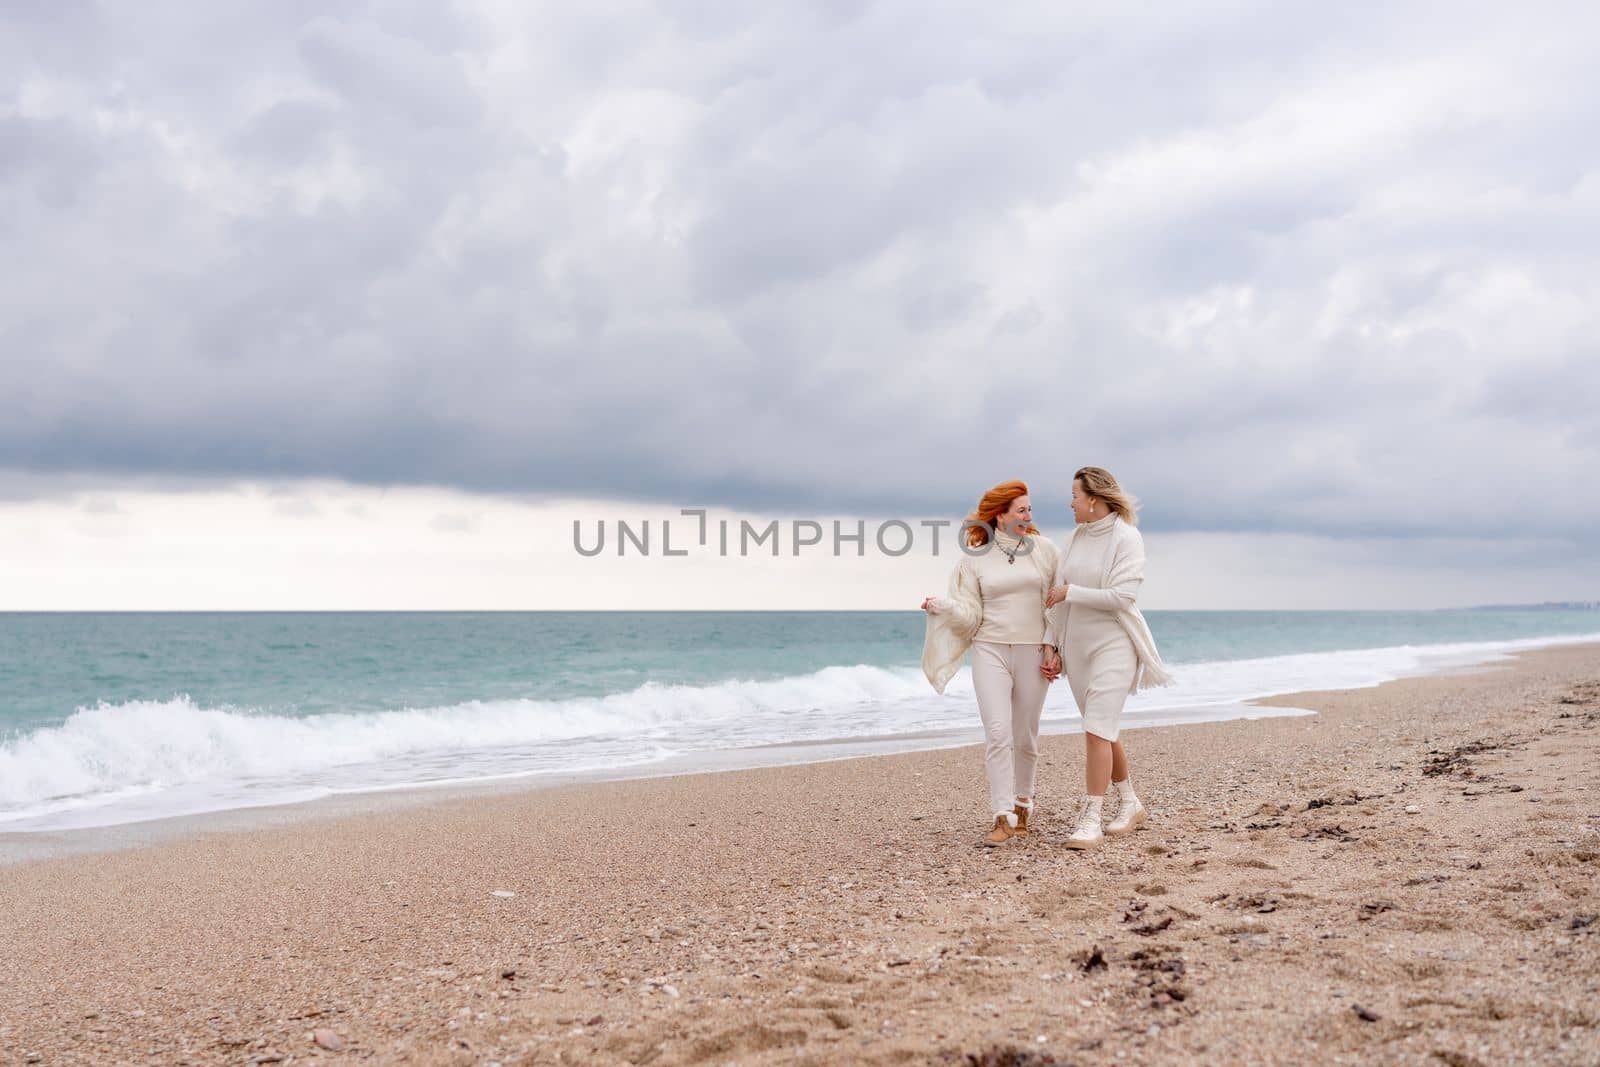 Women sea walk friendship spring. Two girlfriends, redhead and blonde, middle-aged walk along the sandy beach of the sea, dressed in white clothes. Against the backdrop of a cloudy sky and the winter sea. Weekend concept. by Matiunina